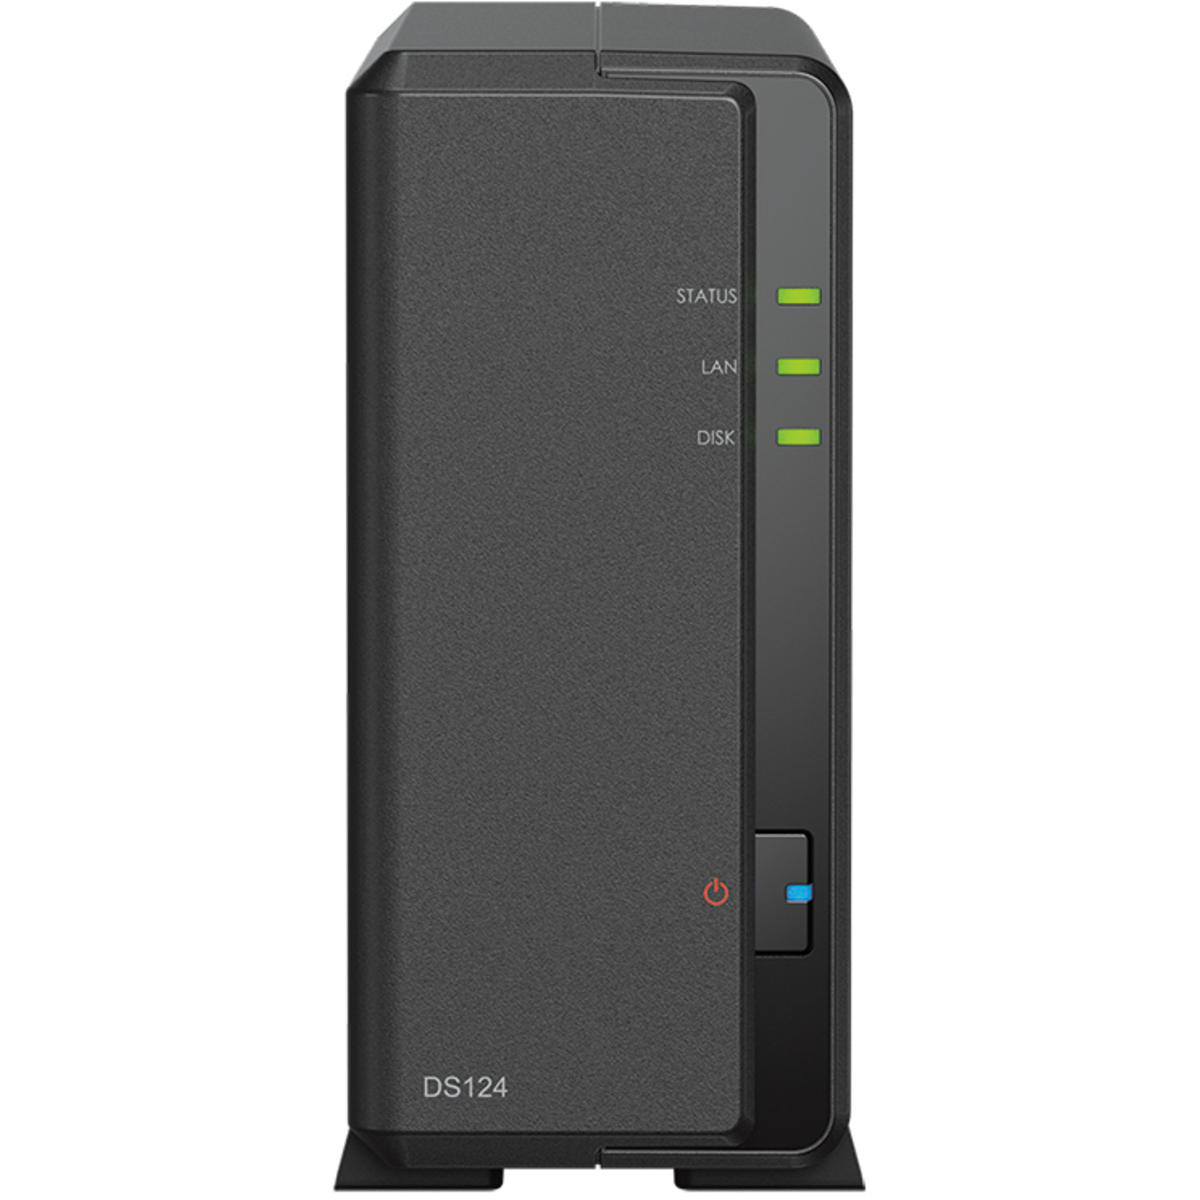 Synology DiskStation DS124 8tb 1-Bay Desktop Personal / Basic Home / Small Office NAS - Network Attached Storage Device 1x8tb Western Digital Gold WD8004FRYZ 3.5 7200rpm SATA 6Gb/s HDD ENTERPRISE Class Drives Installed - Burn-In Tested DiskStation DS124